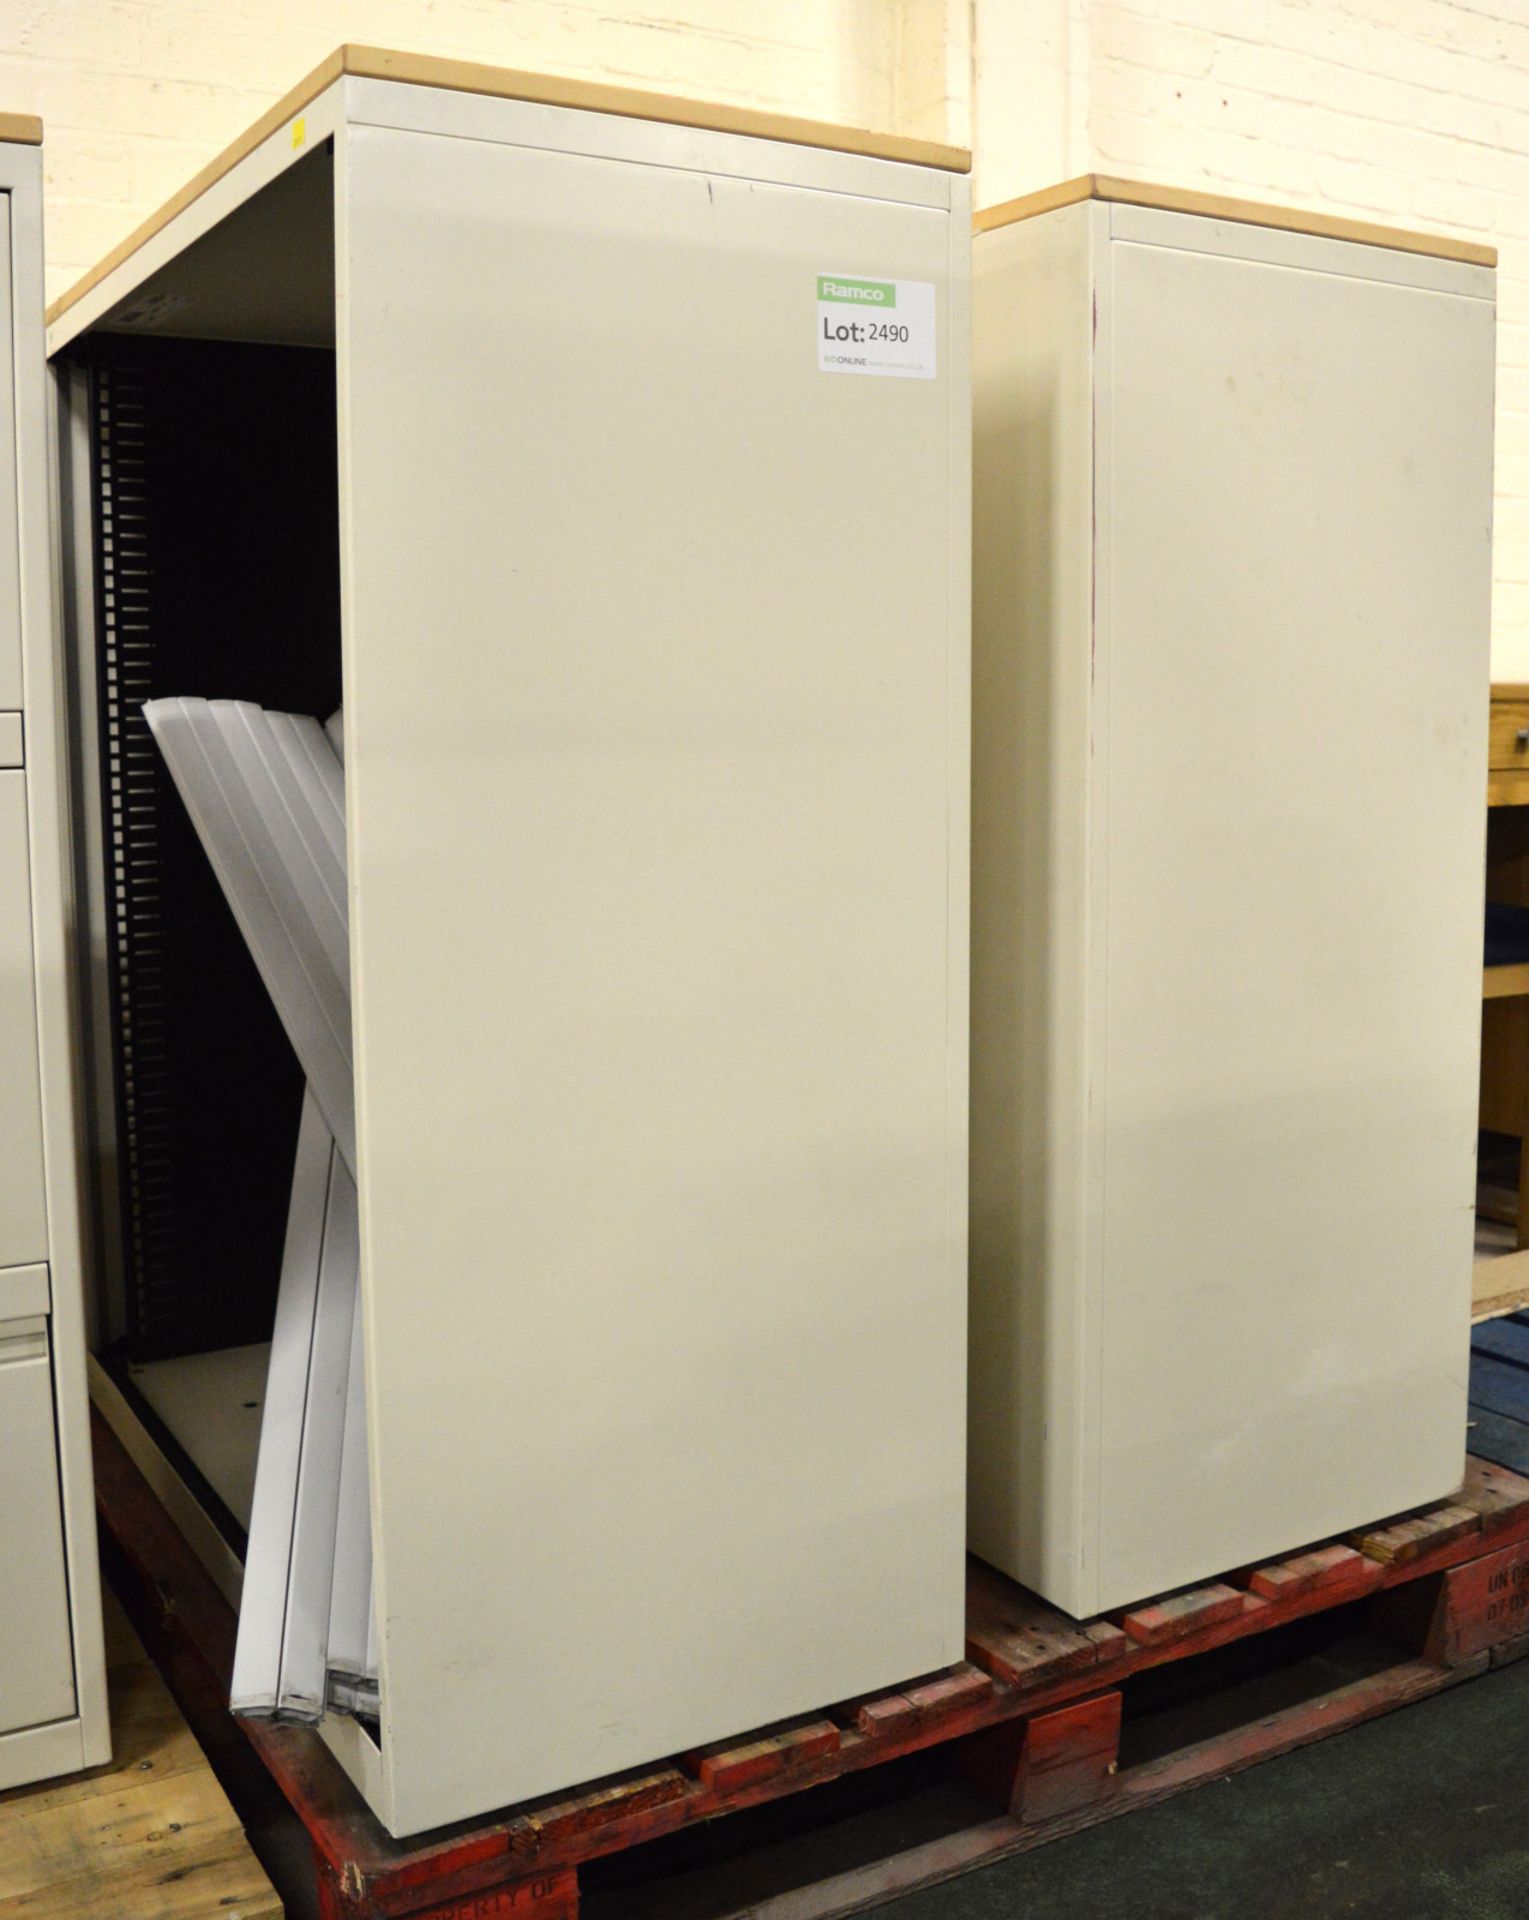 2x Storage Cabinets - Only one set of roller doors working.